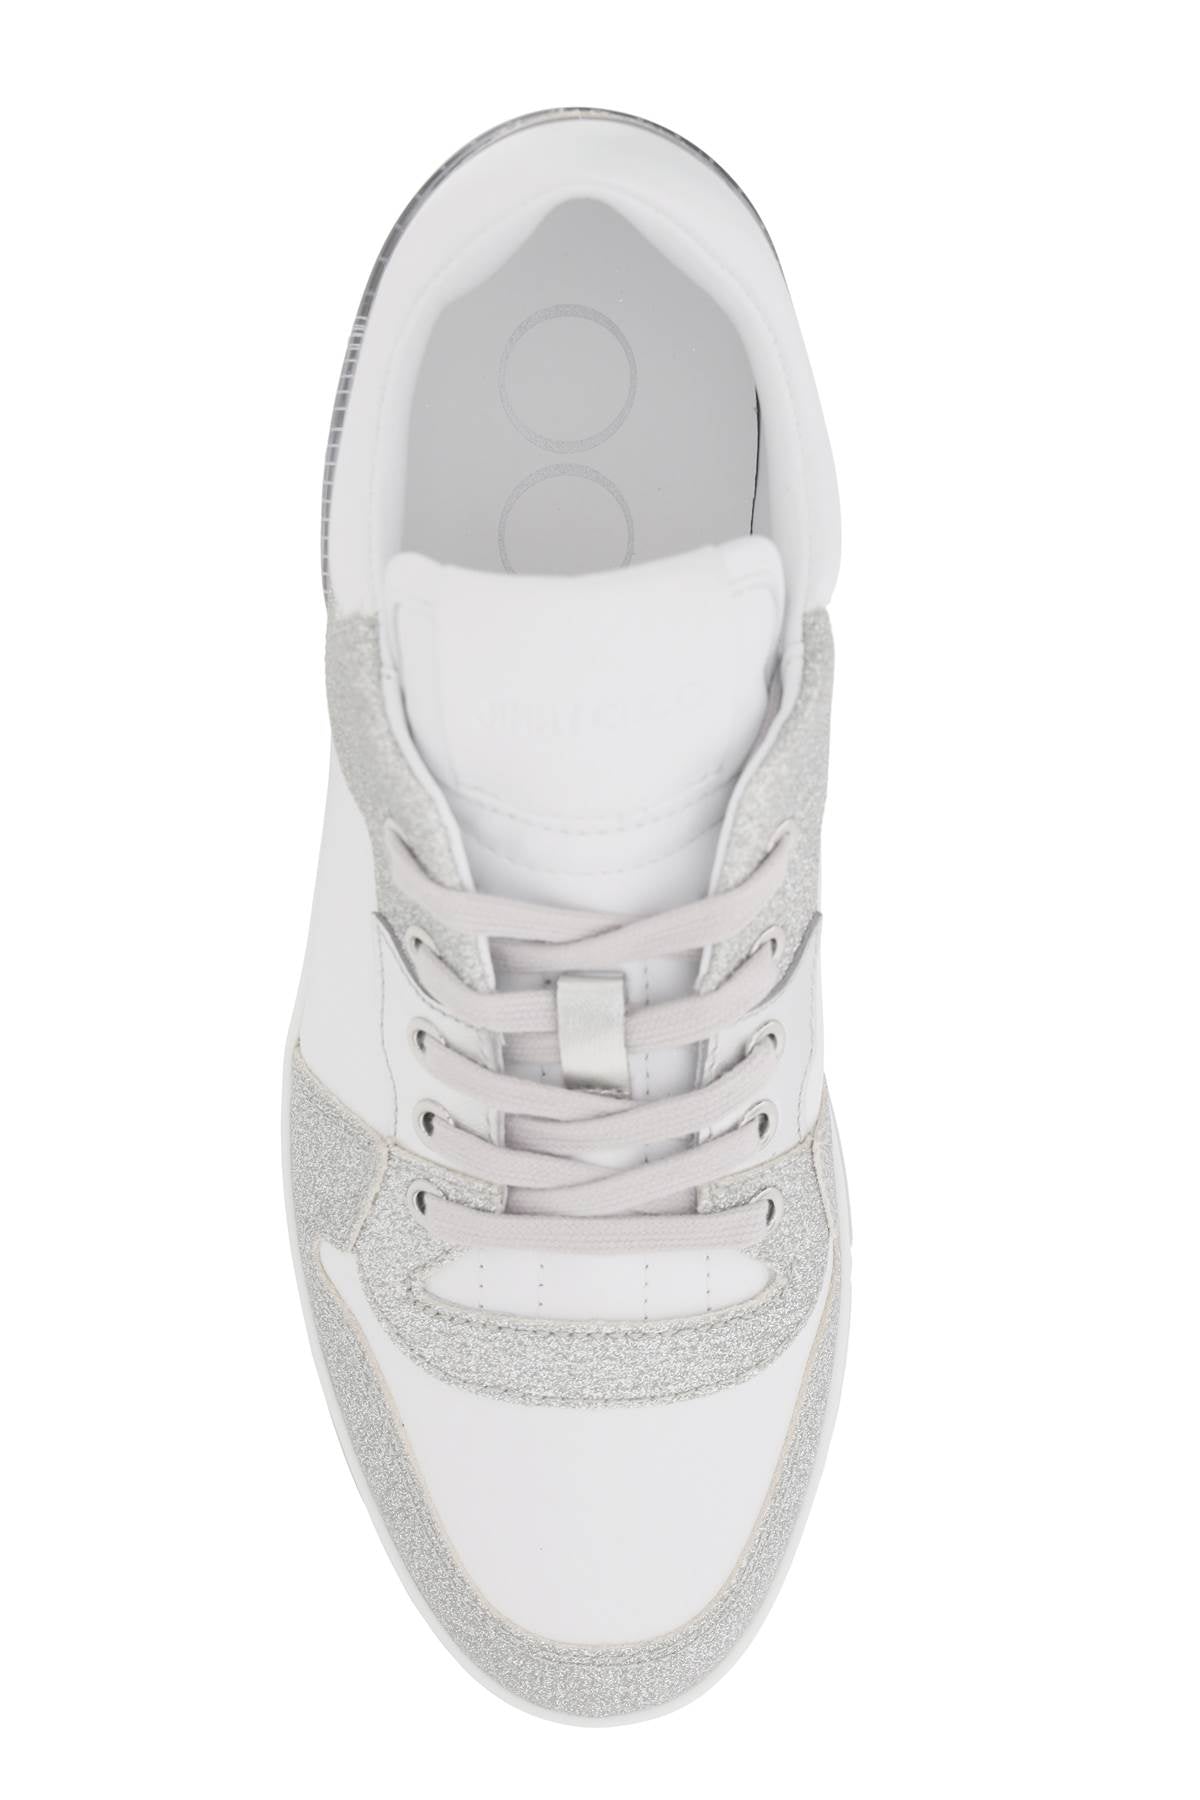 JIMMY CHOO Glittered Leather Sneakers with Embroidered Logo and Semi-Transparent Rubber Insert